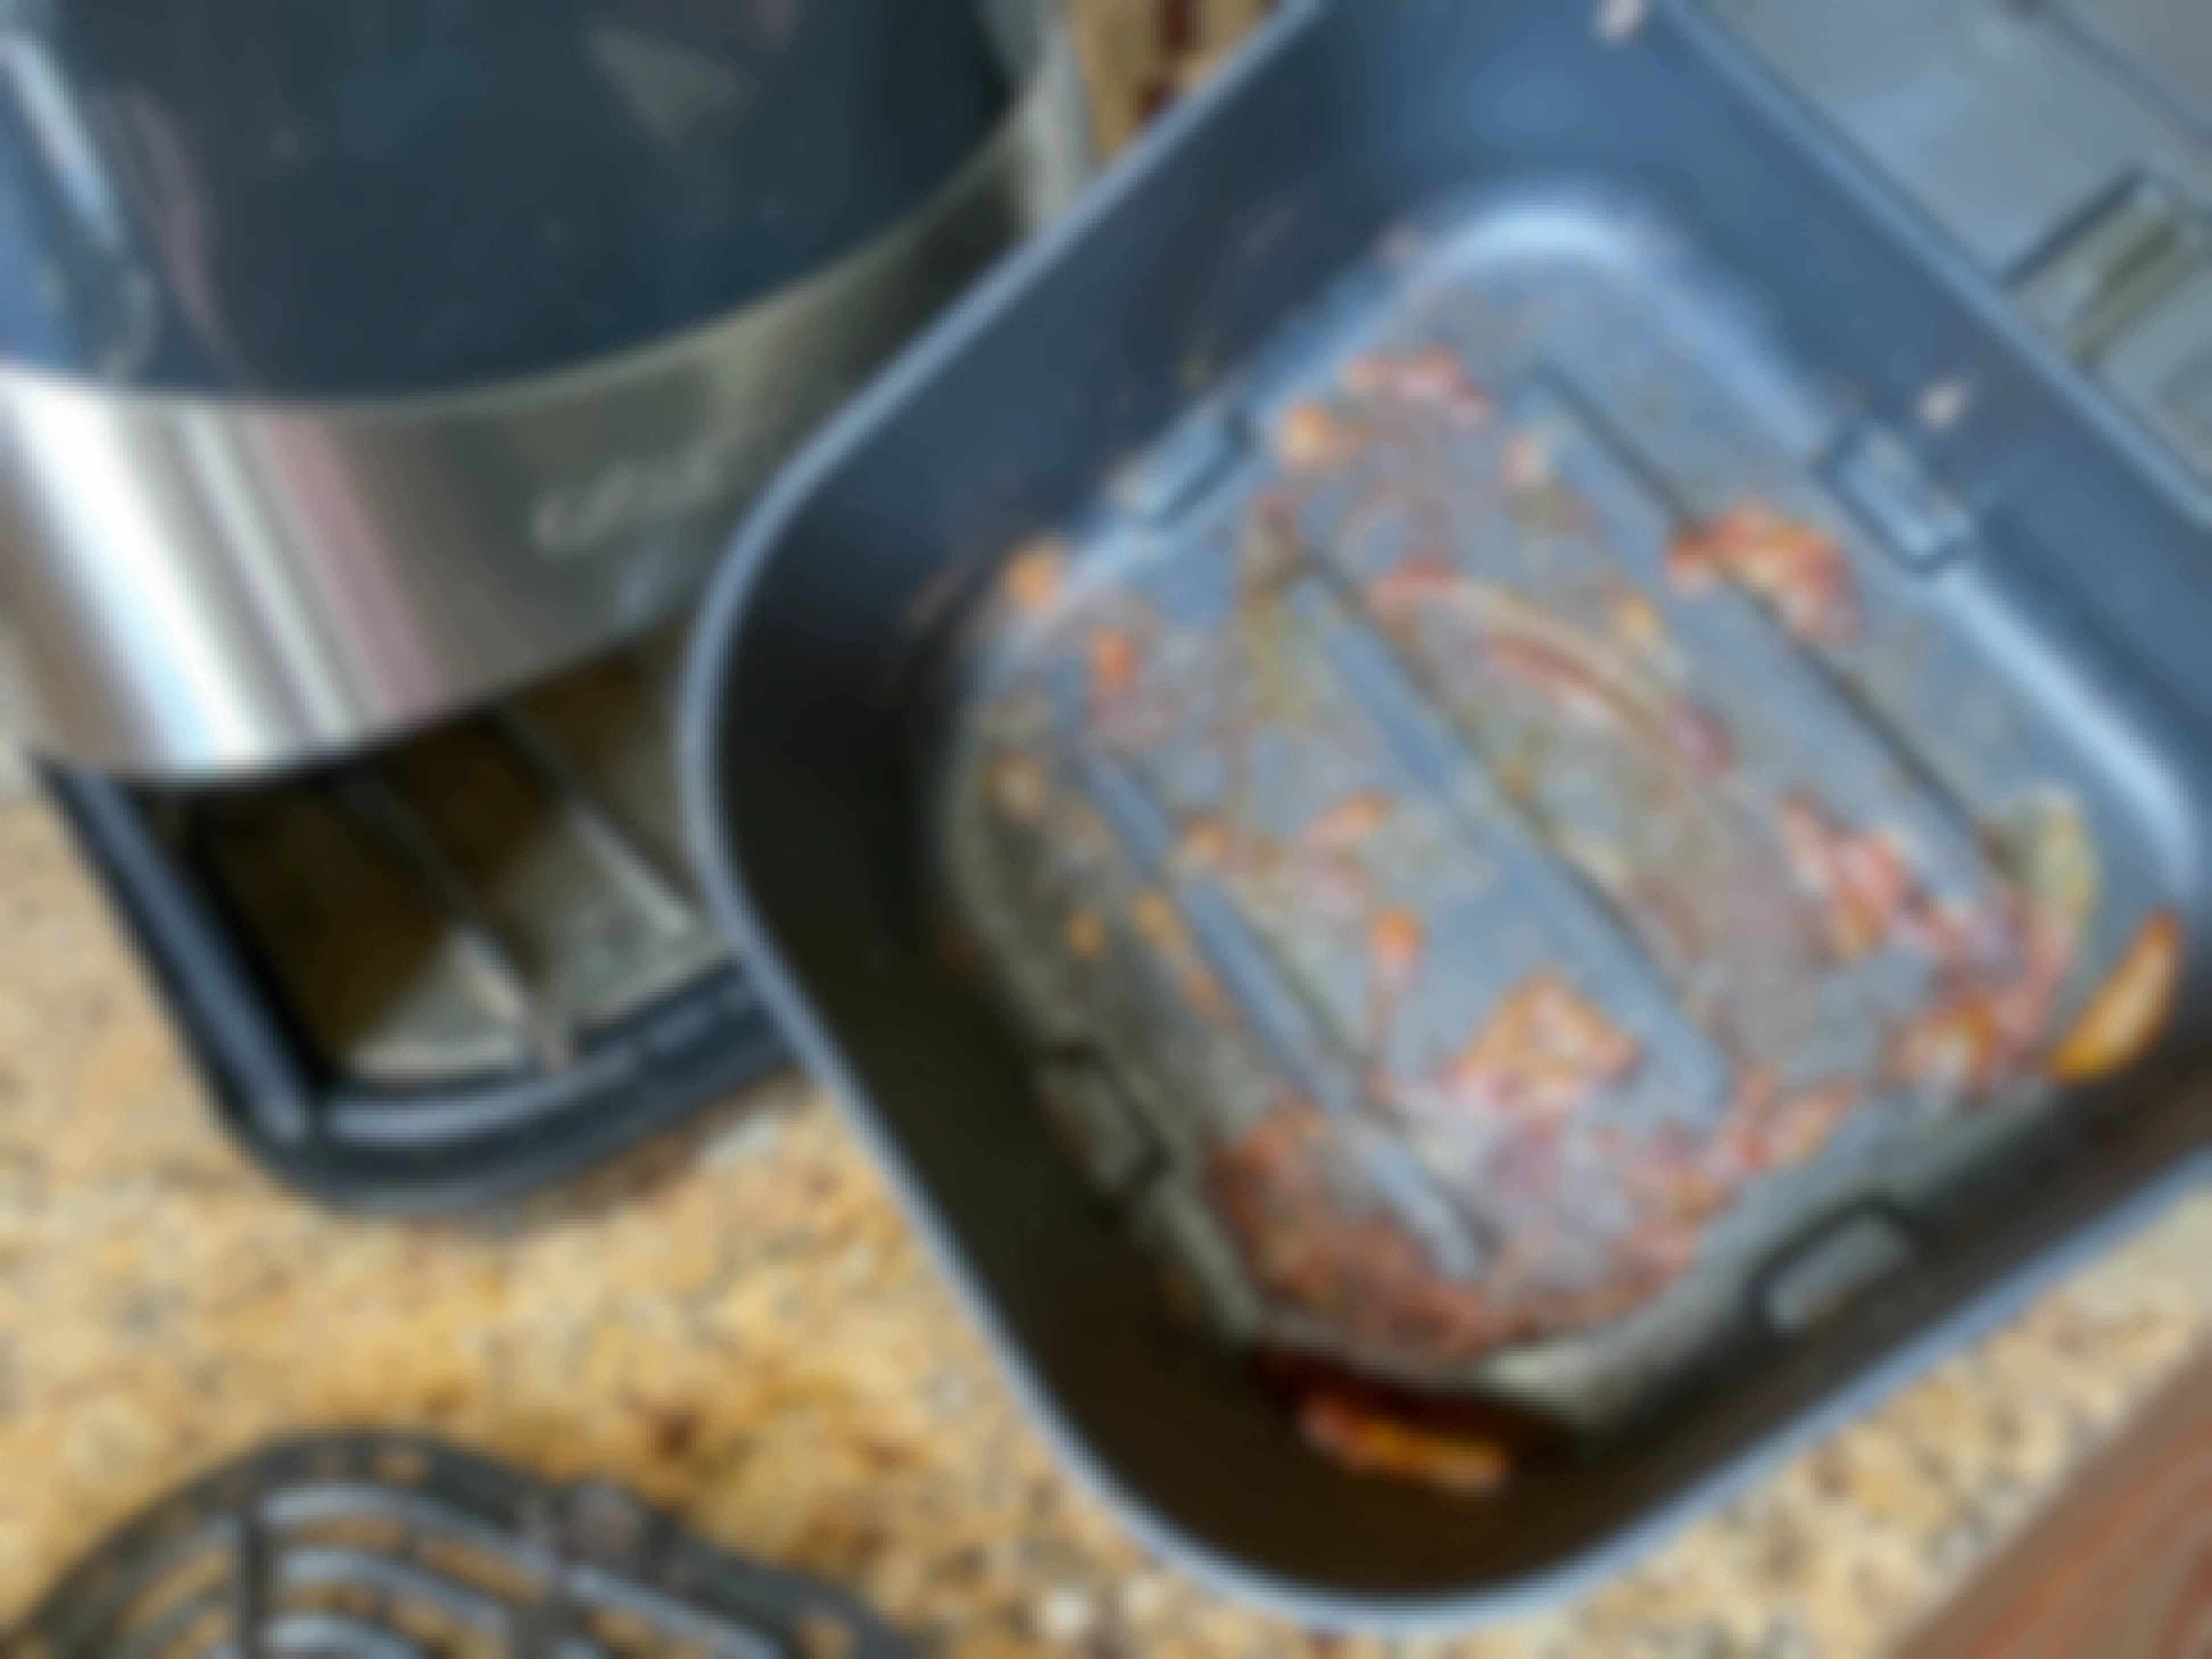 An air fryer with oil and food caked on the bottom of the pan